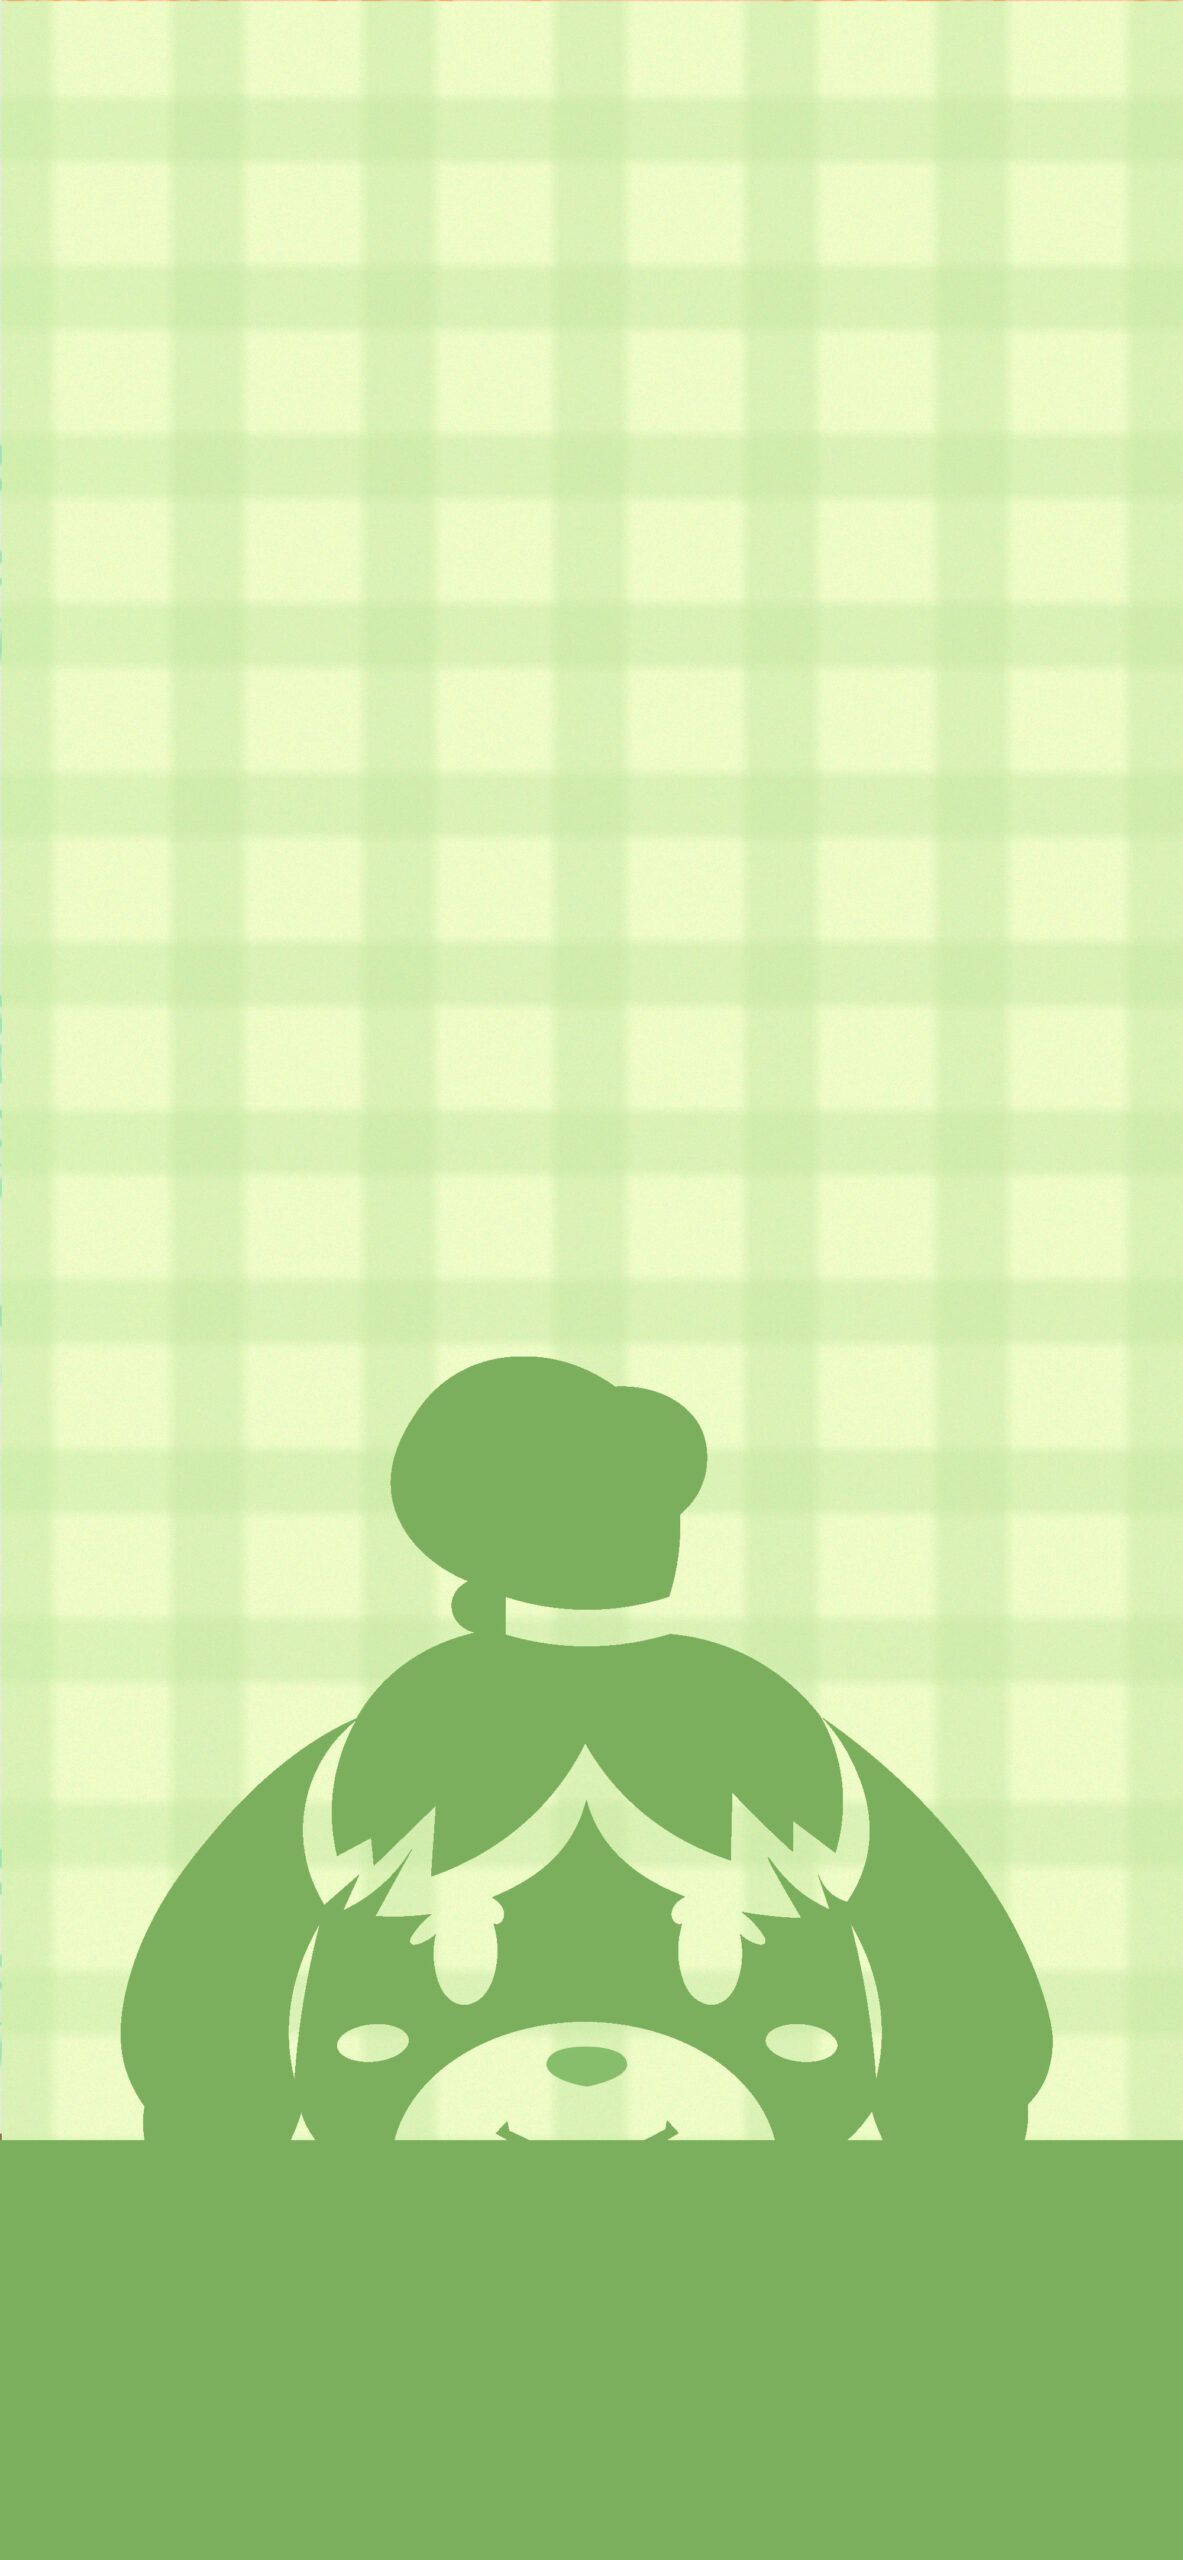 Animal Crossing iPhone wallpaper featuring a villager in a chef's hat. - Animal Crossing